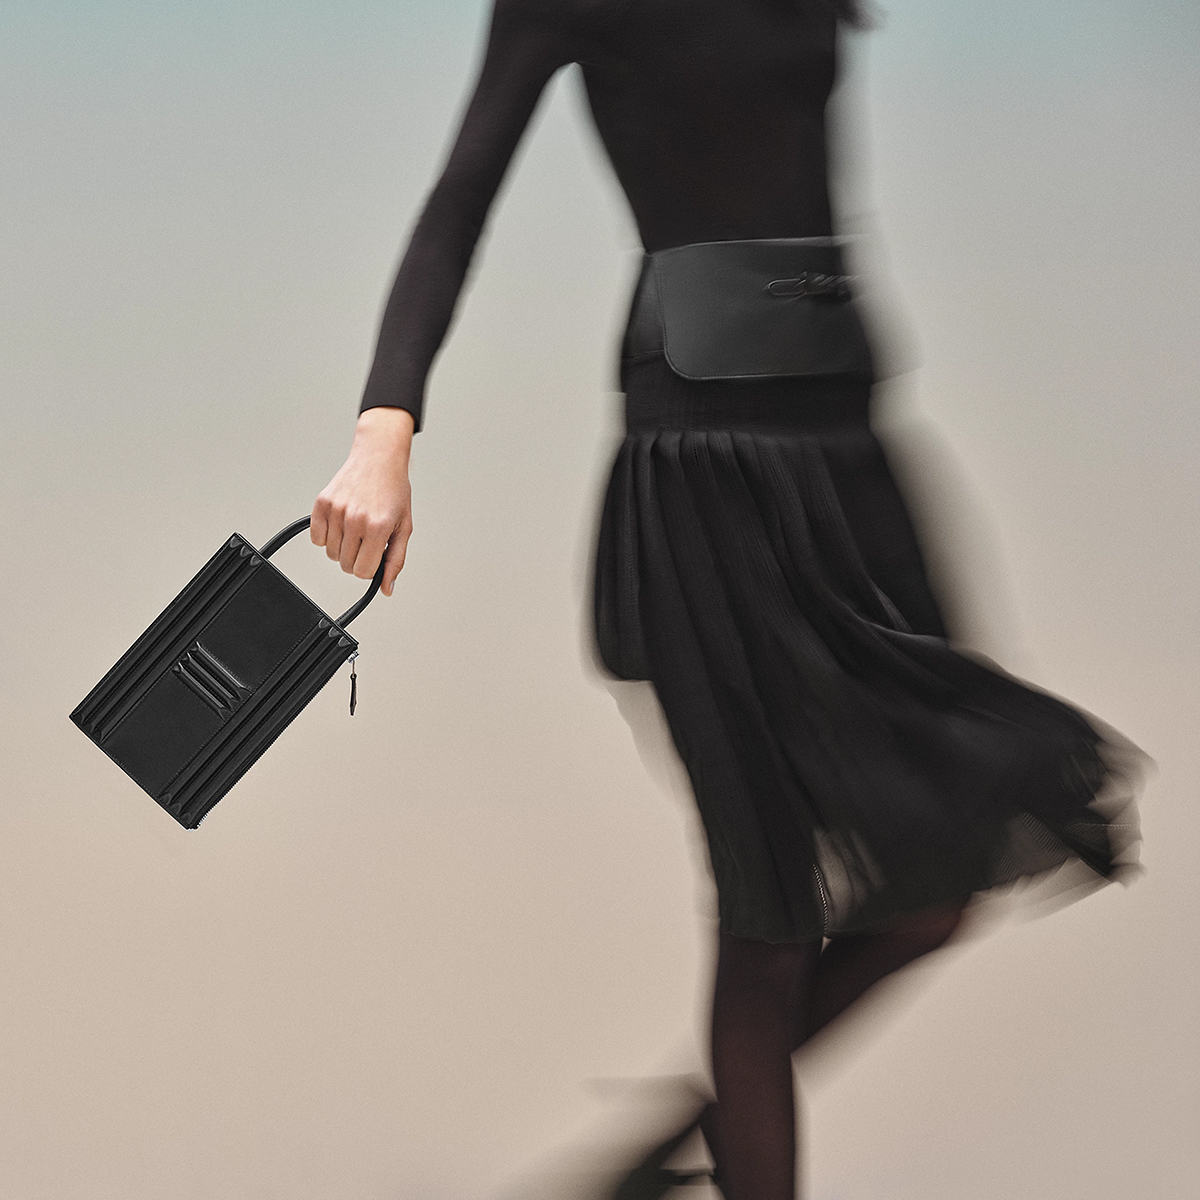 The handle of the Cadenas Clutch is long enough for wrist (and possibly arm) carry. Photo via Hermes.com.